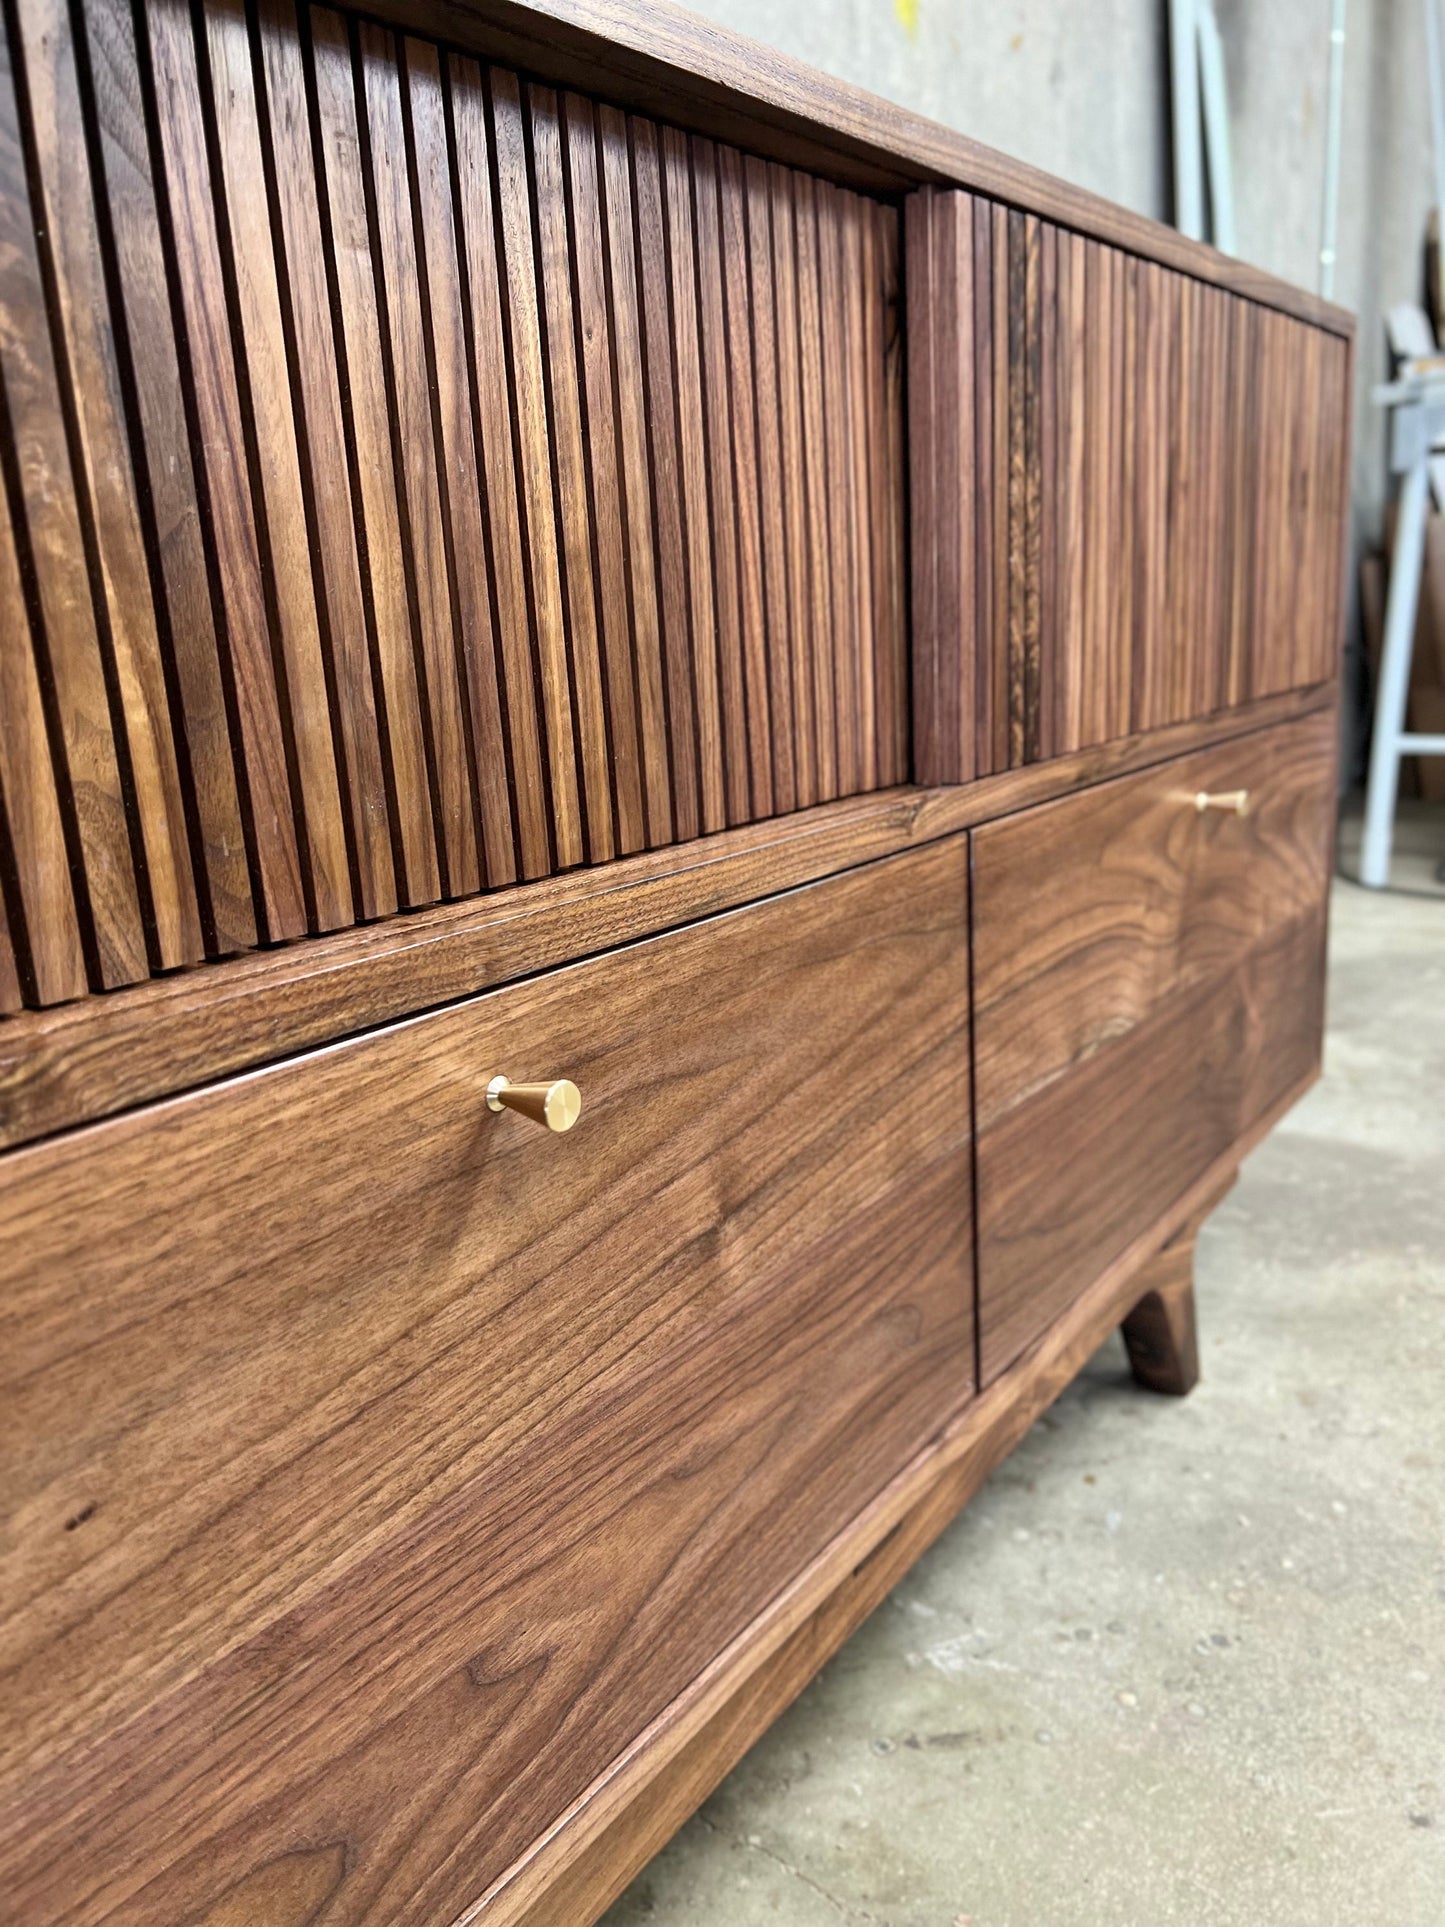 A close up photo of rectangular slat texture of the cabinets sliding doors. 3 drawers line the bottom, with even reveals around the drawers perimeter. About 2 inches from the top and centered in each drawer is a tapering, brass finger pull.